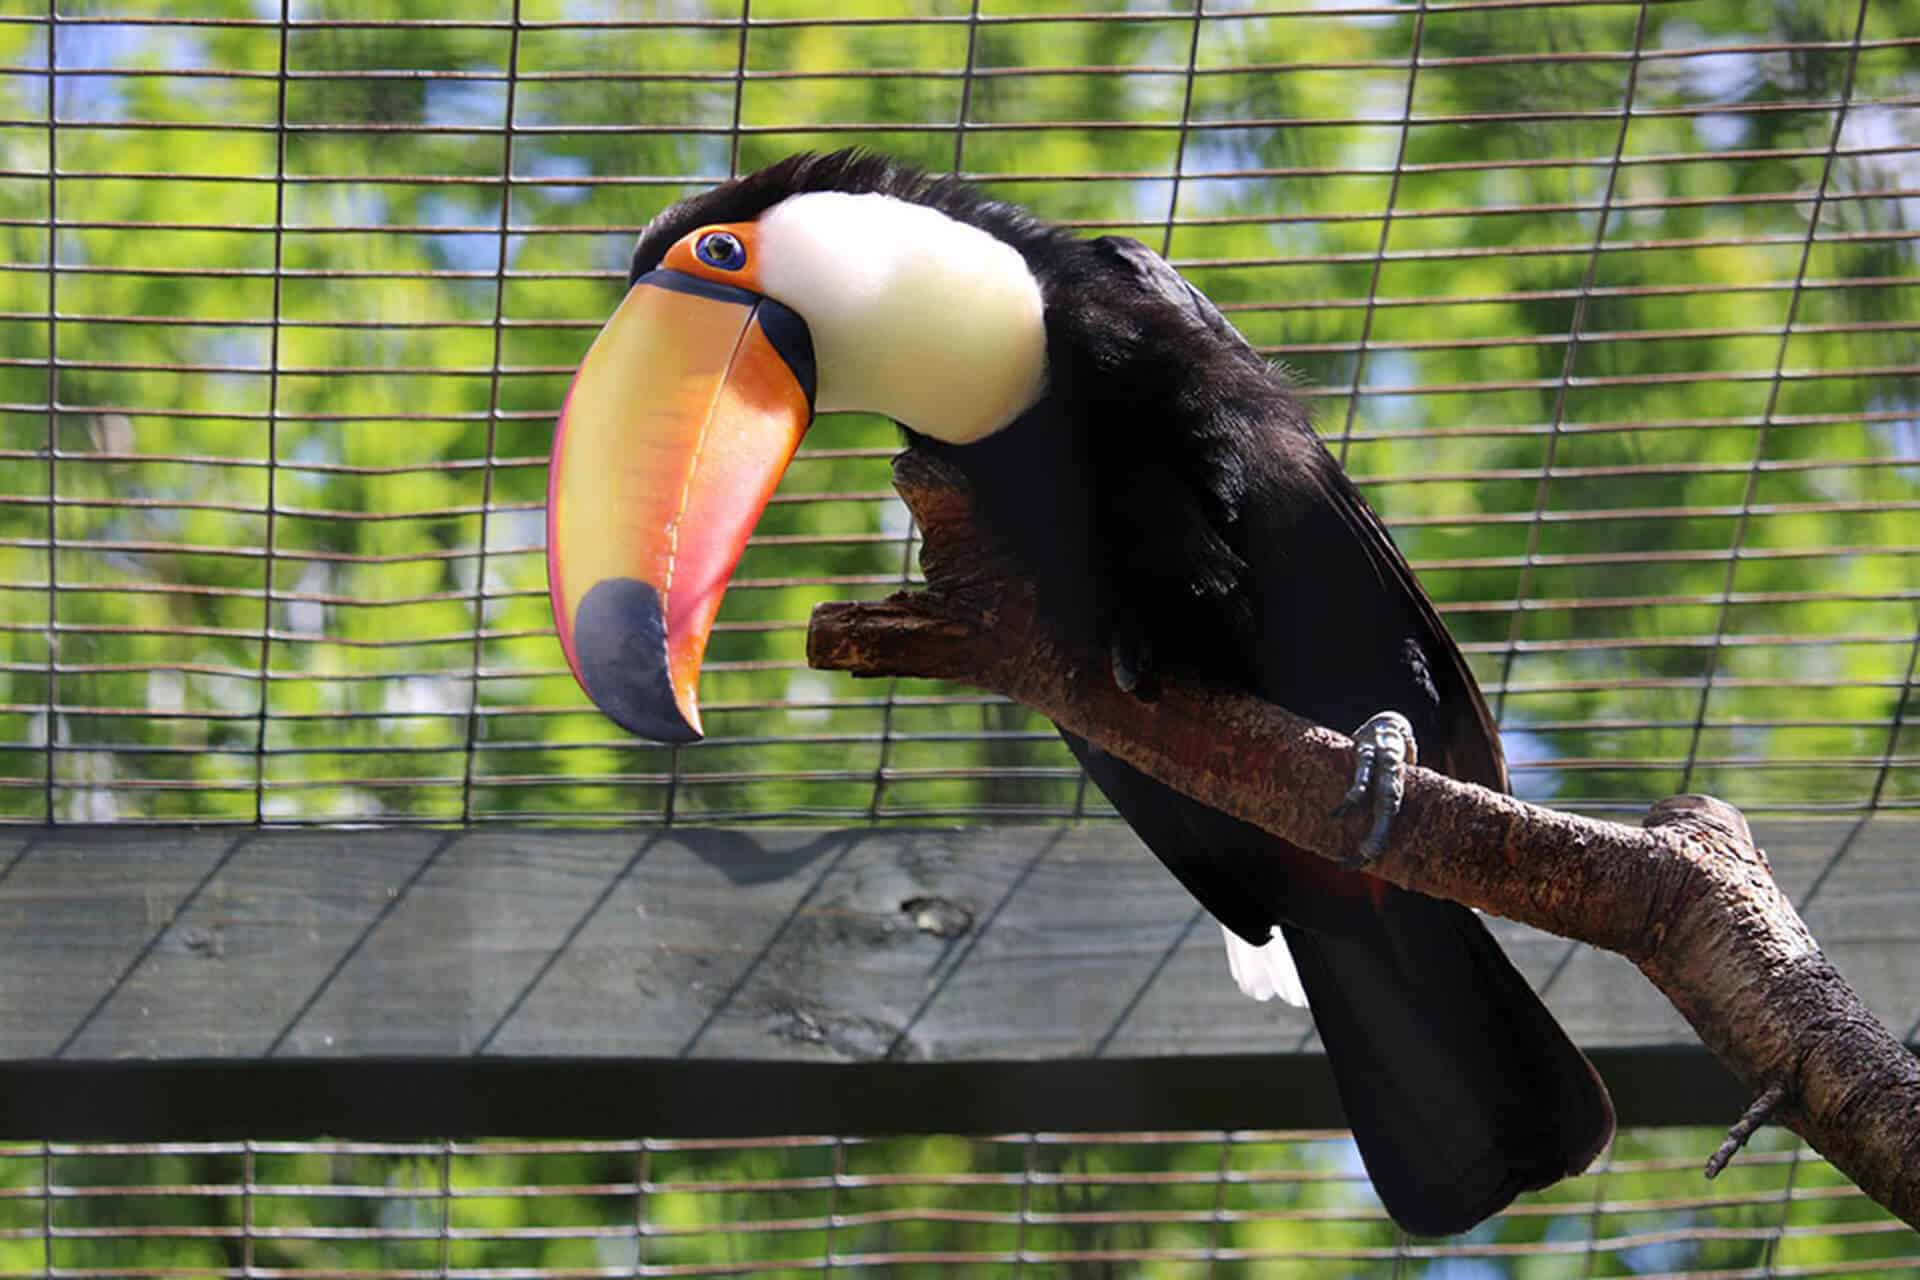 Information about the Toucan Bird